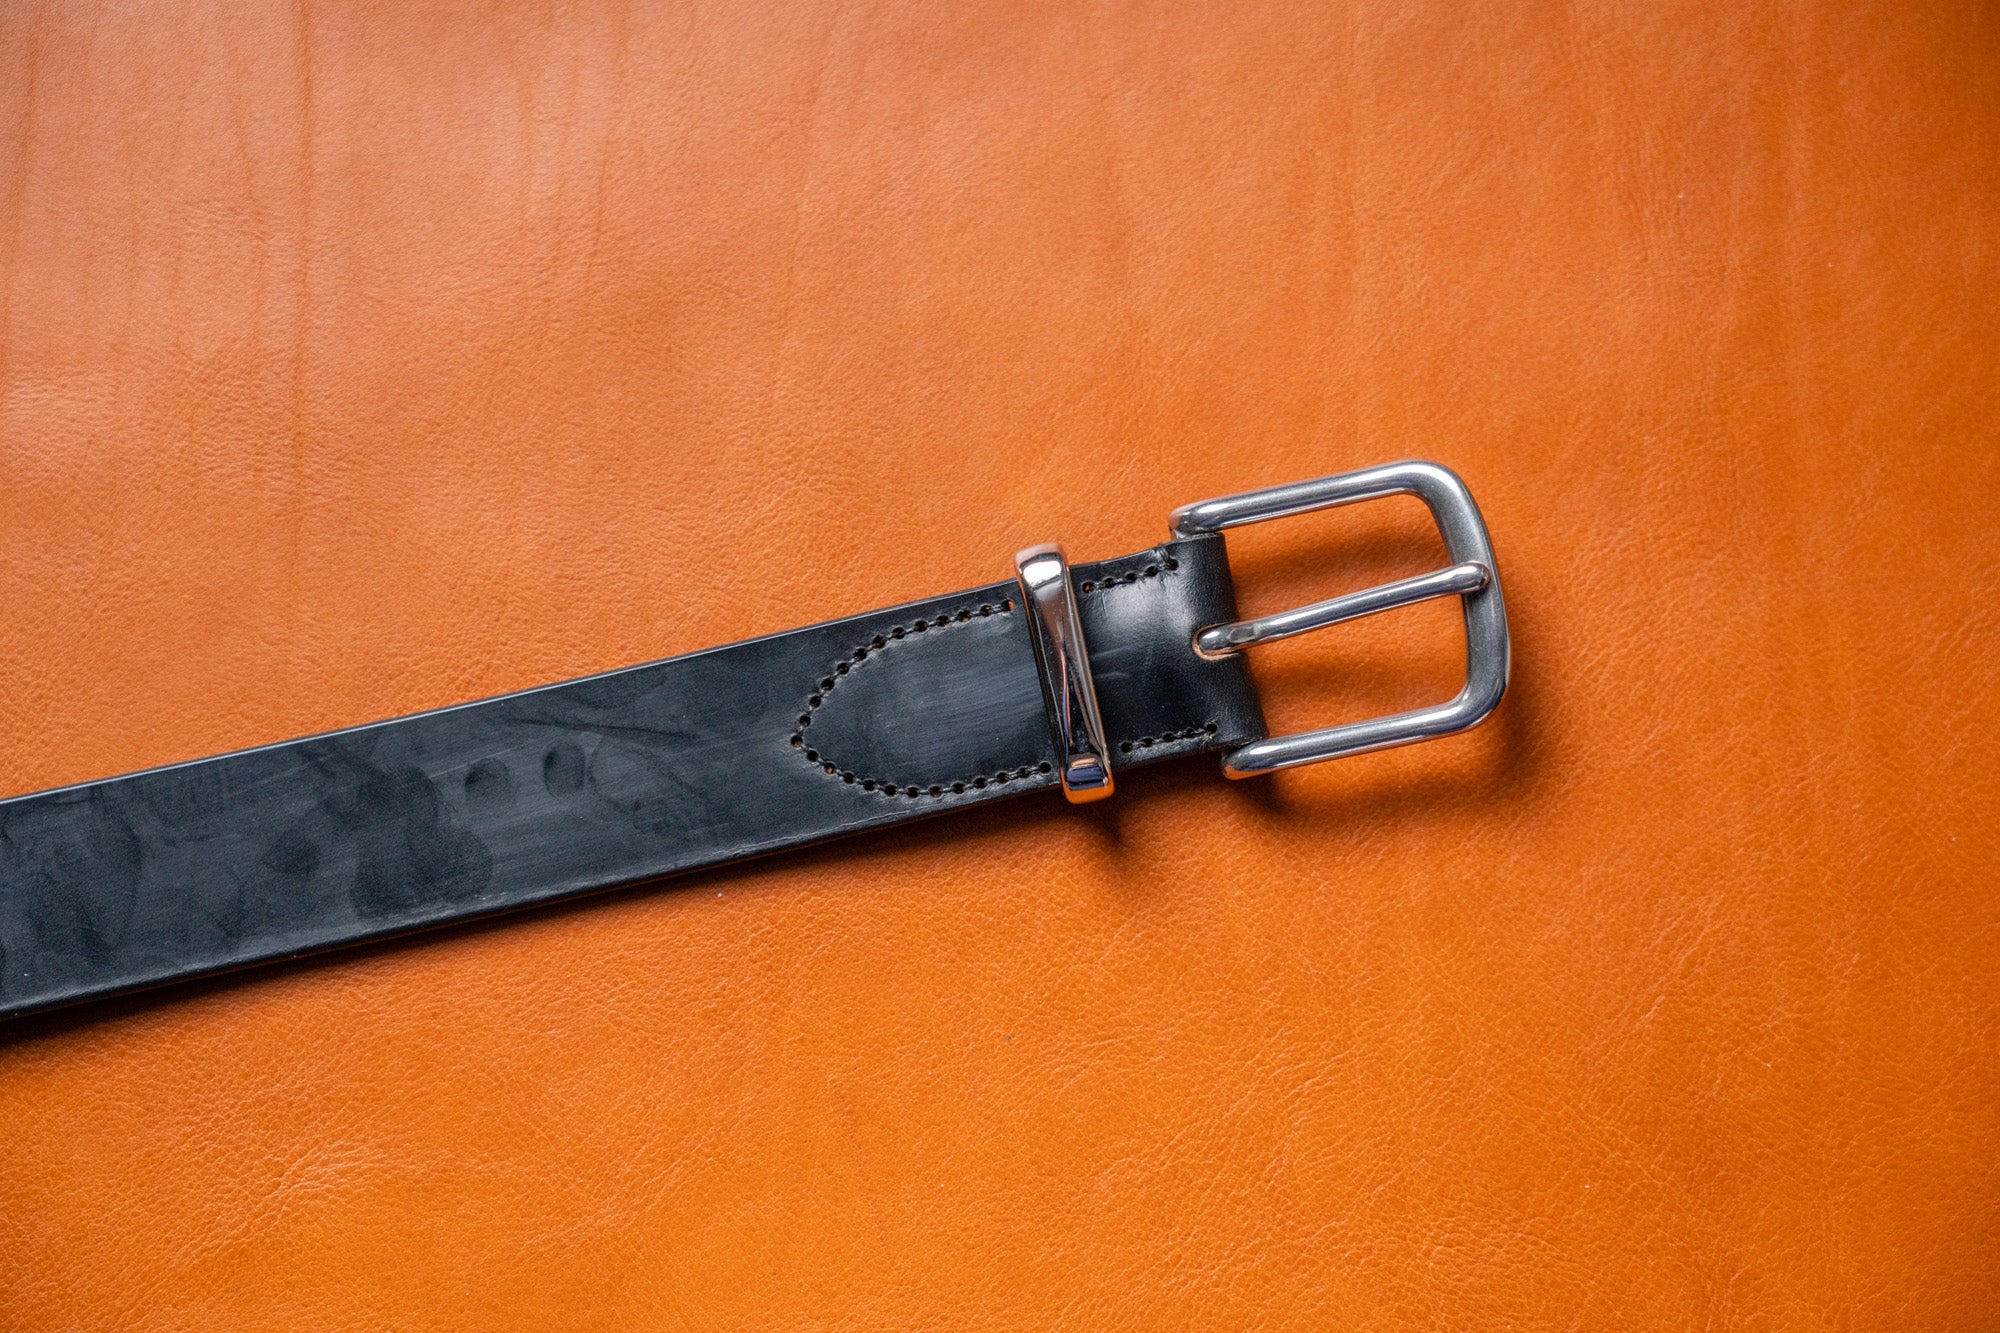 A finished DIY leather belt kit from J.H.Leather